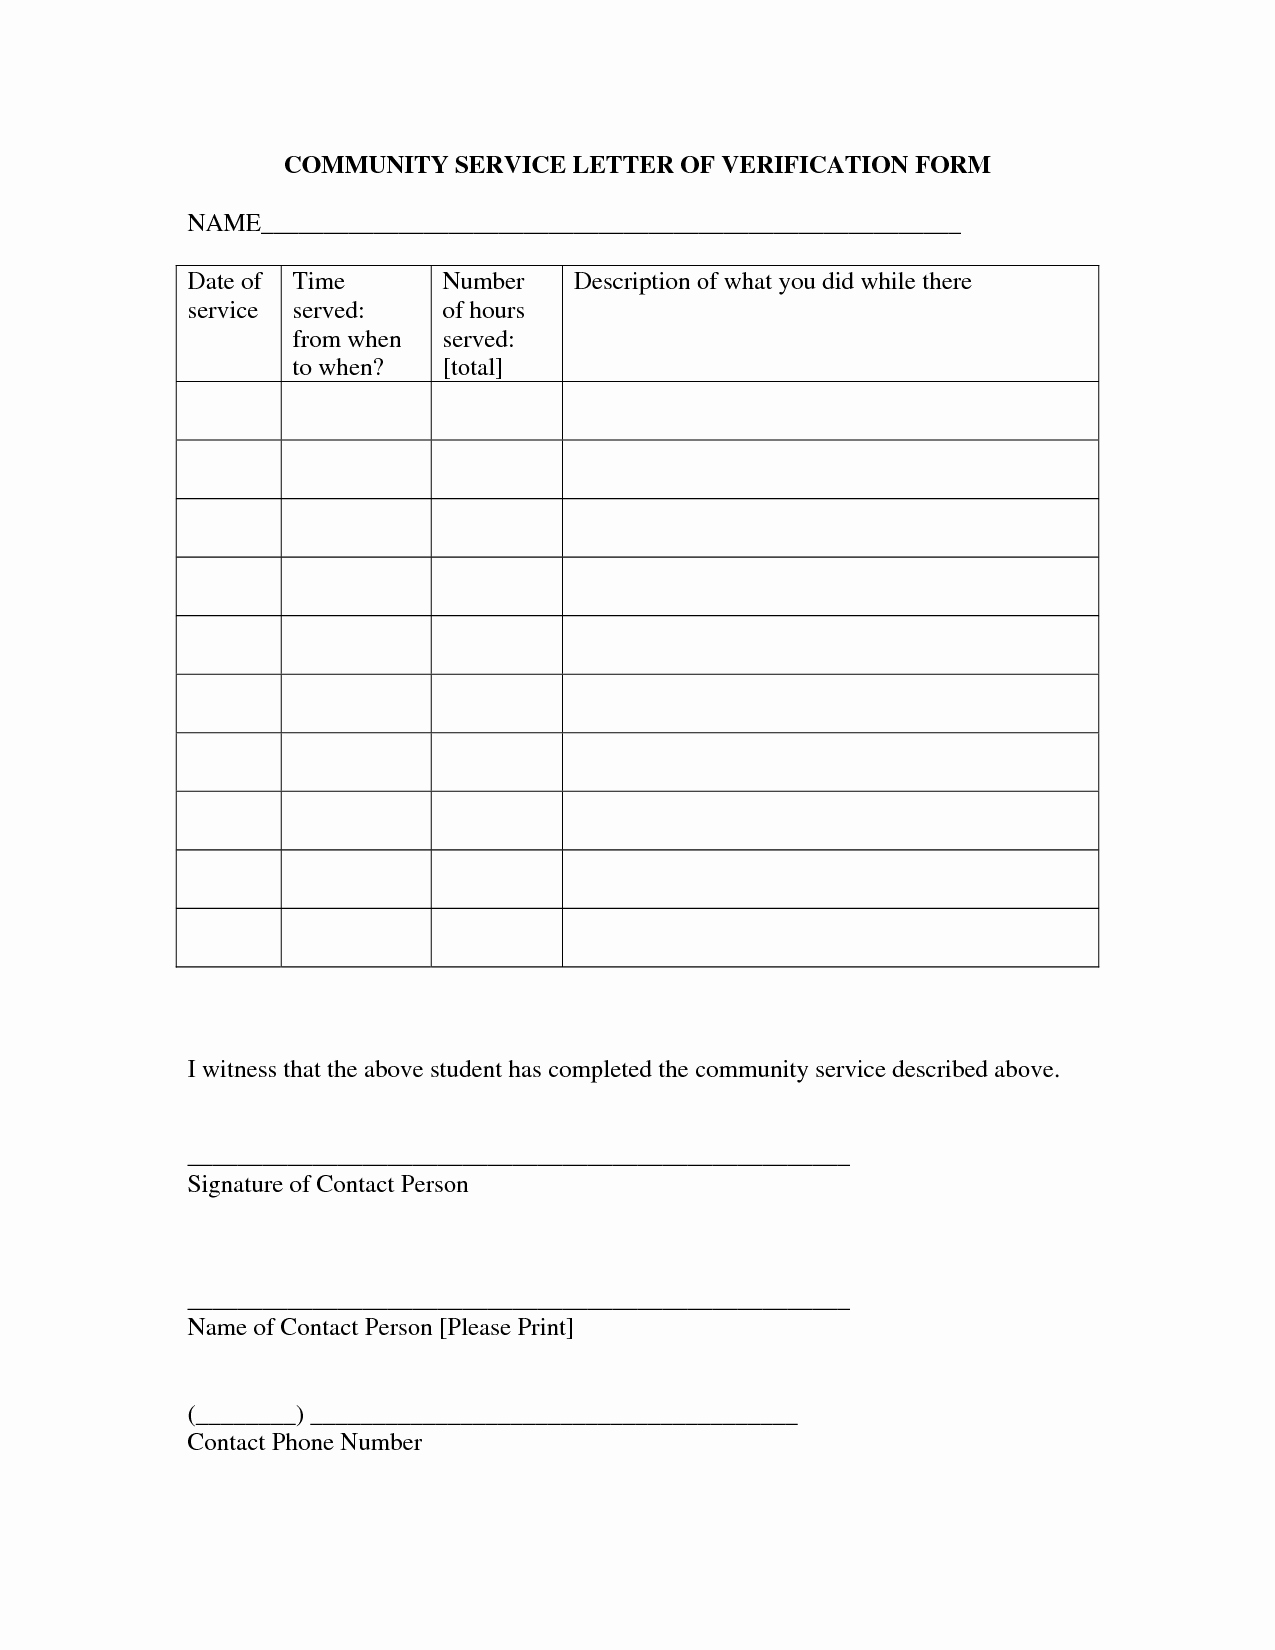 Community Service form Template Awesome Munity Service form Template